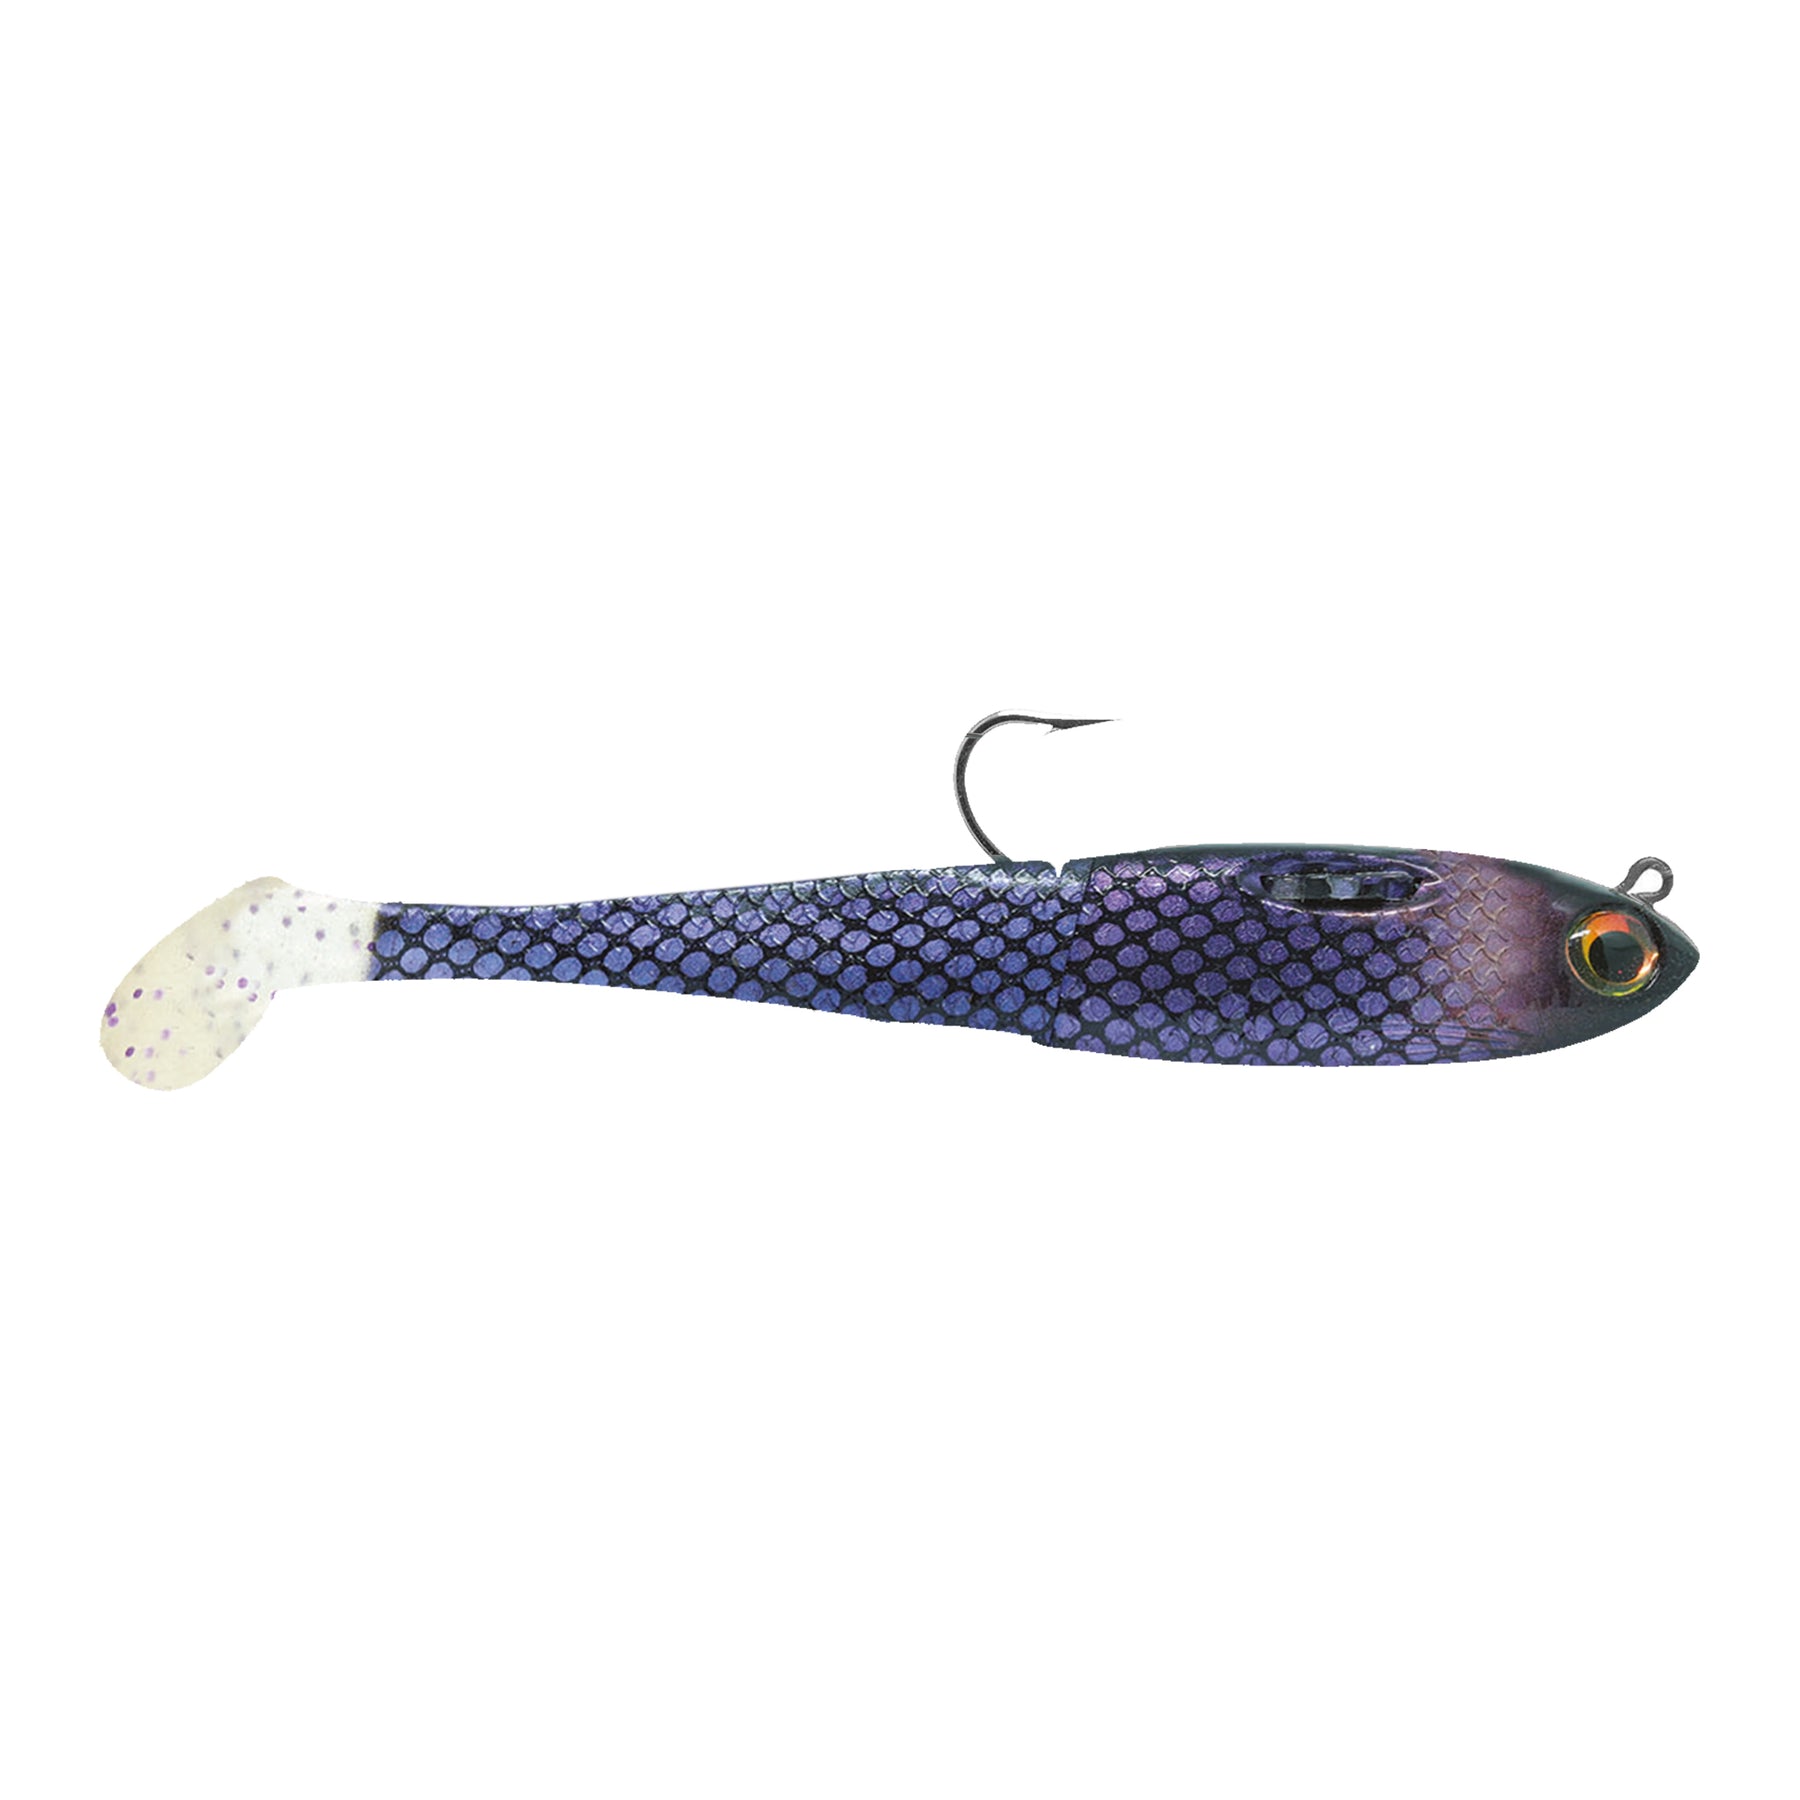 SpoolTek Lures ST4GS-10 4 Great Sardini Lure with 4/0 Hook, 10 Leader,  1/2 oz, Sinking Lures -  Canada